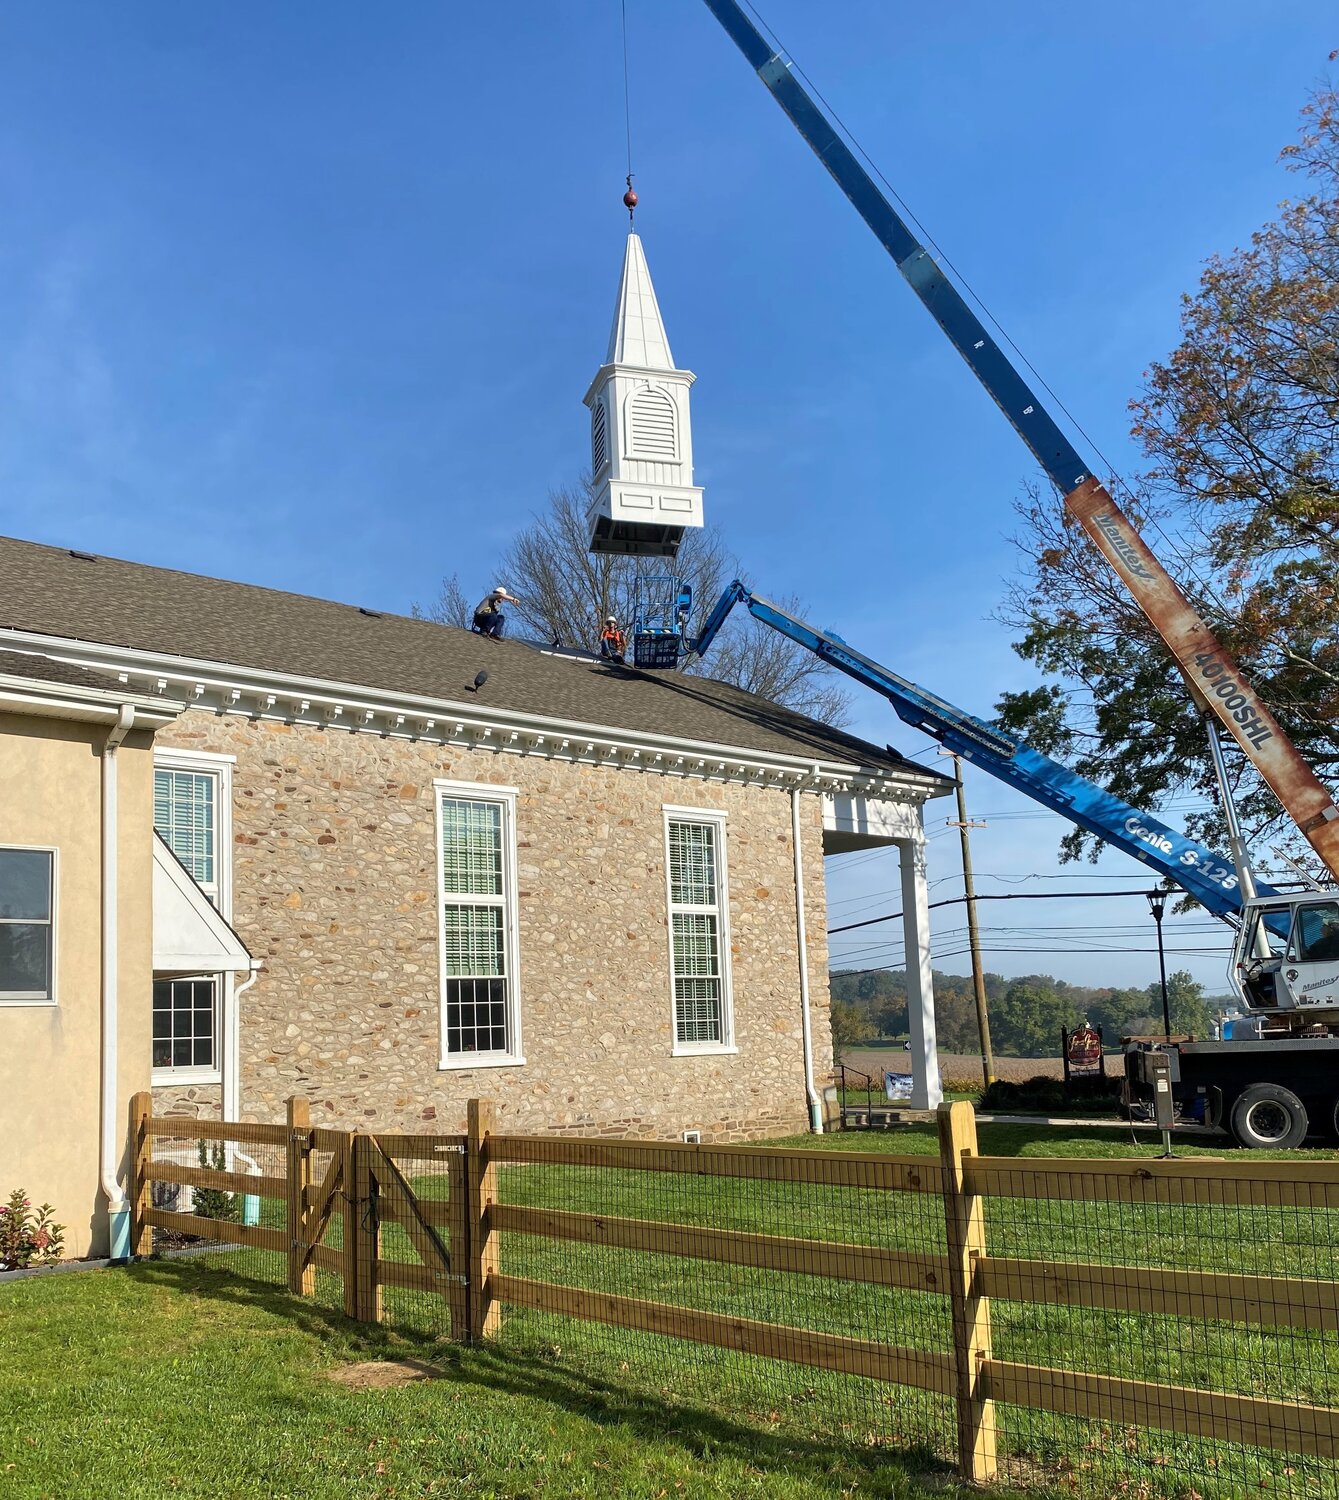 A crew from Campbellsville Industries Inc., “The Steeple People” of Campbellsville KY, prepare to install the Forest Grove Presbyterian Church’s new steeple.